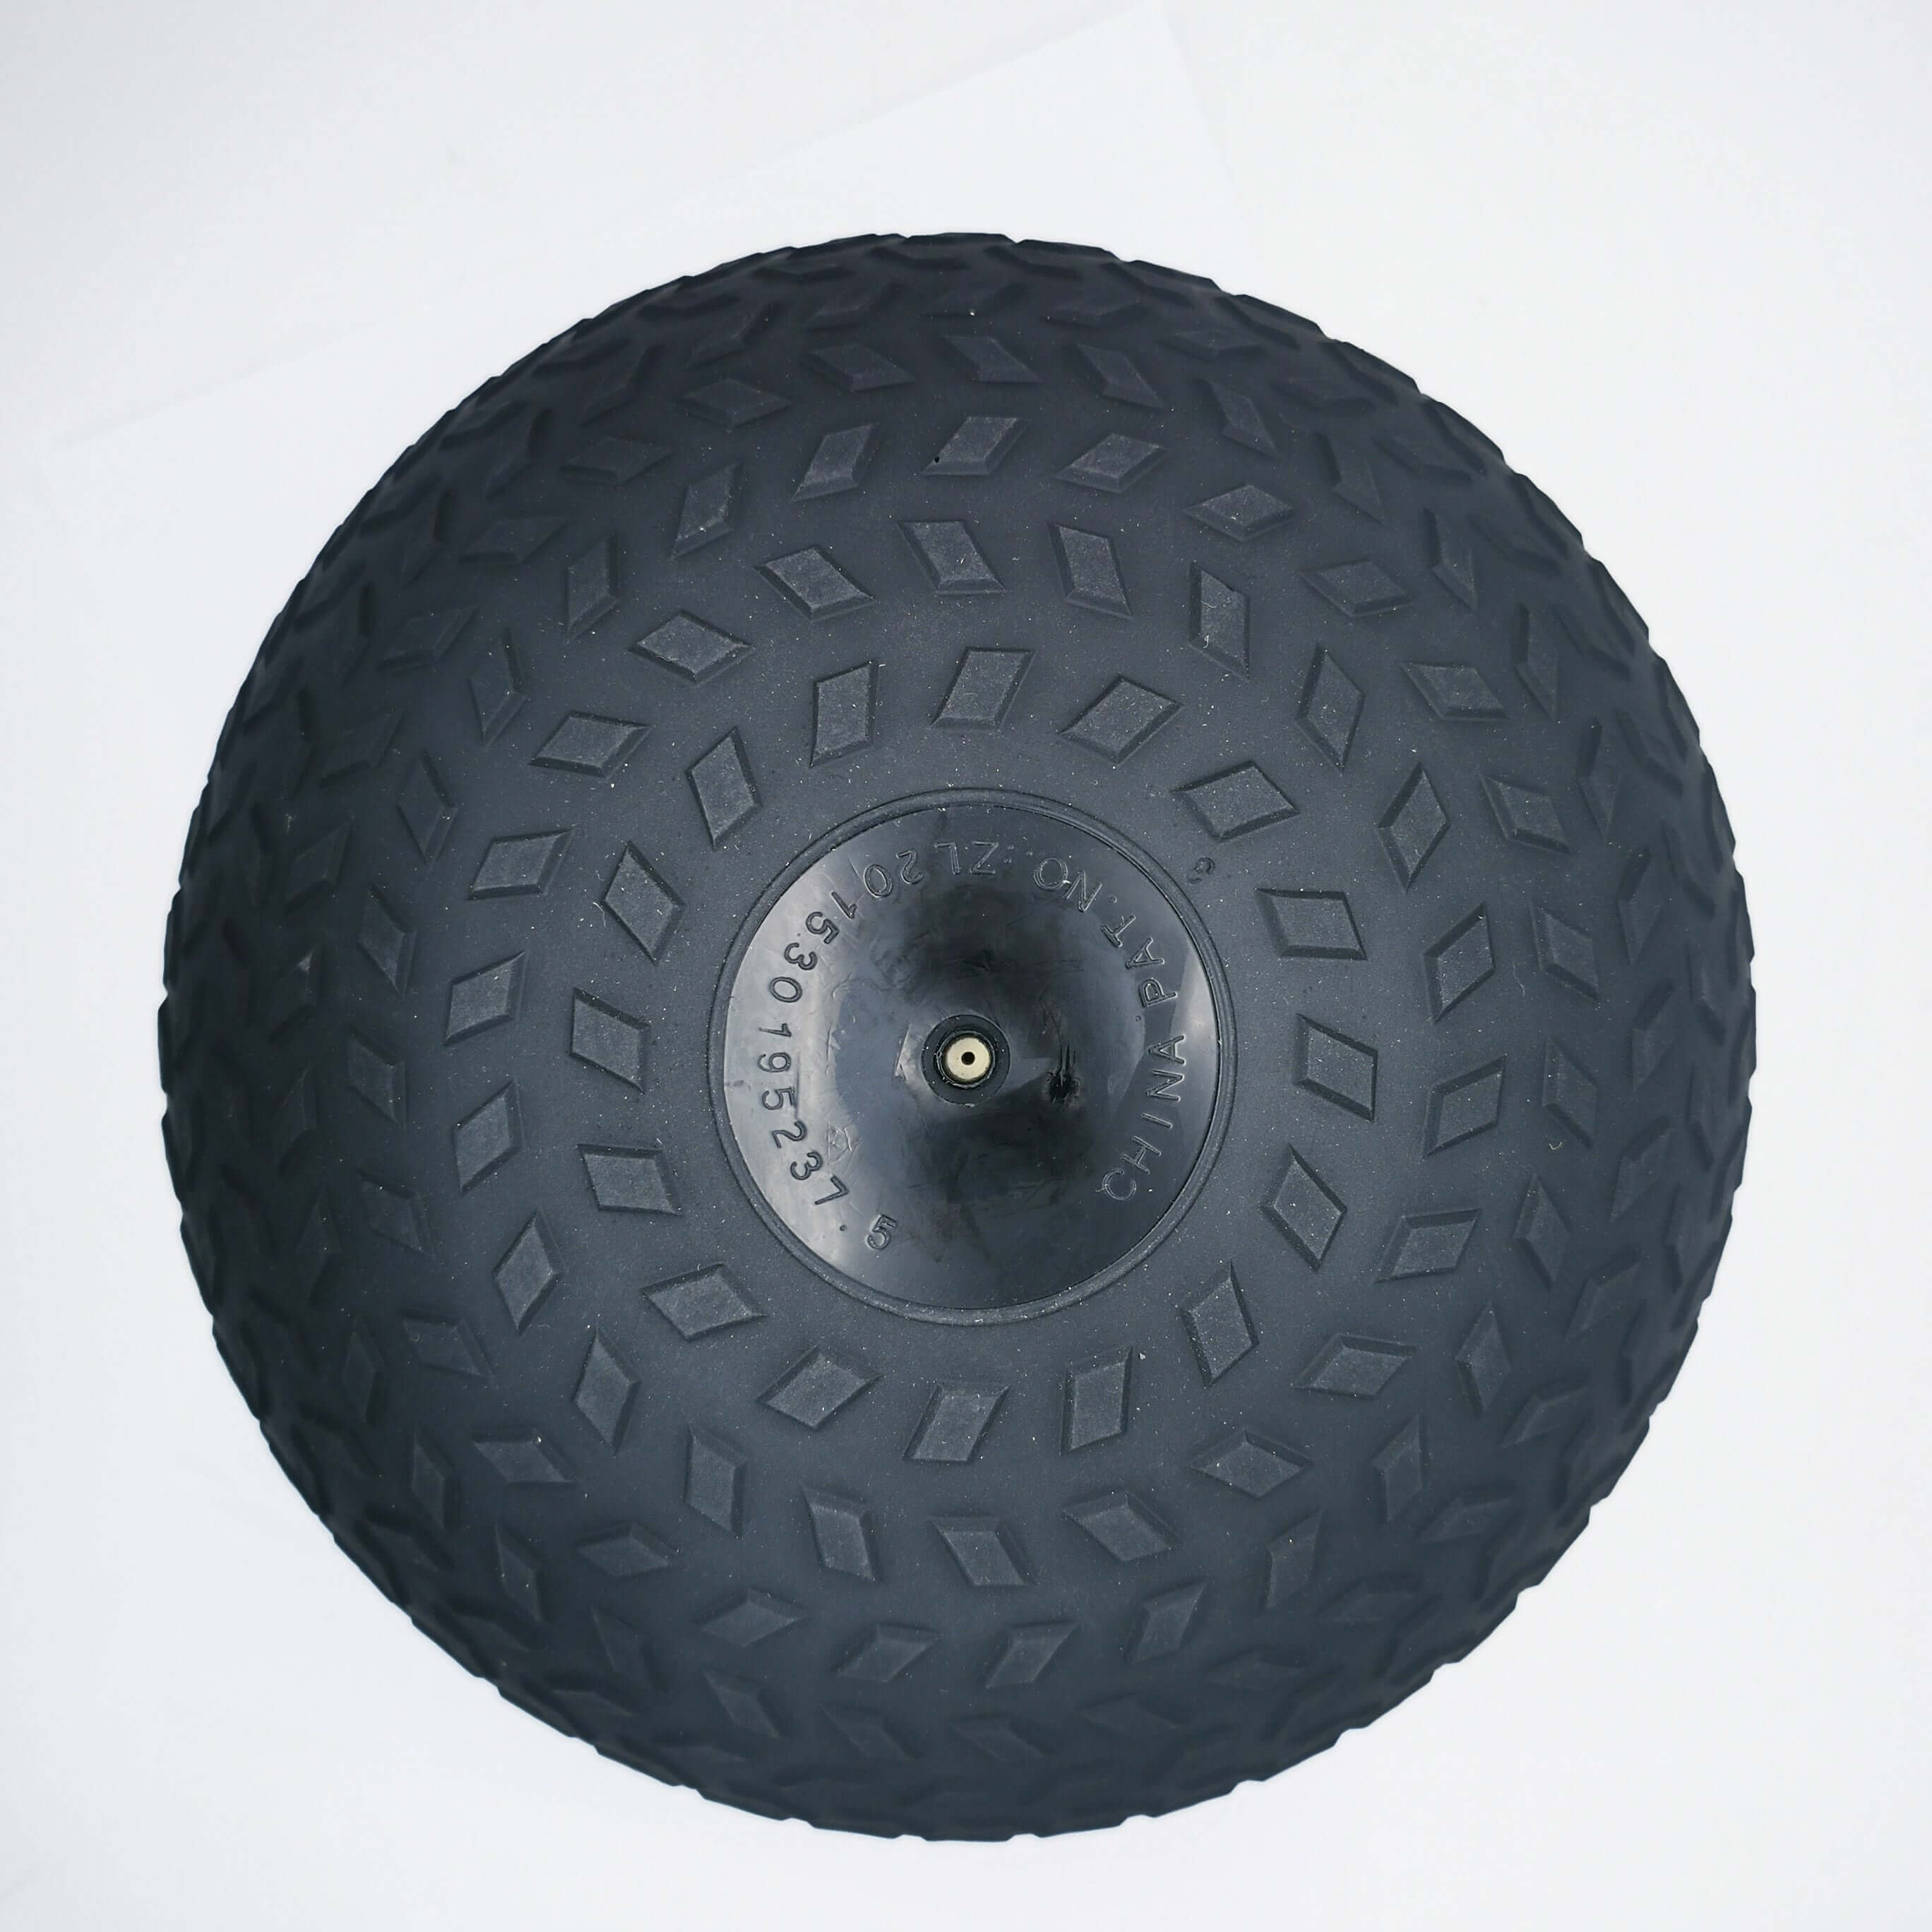 Rubber Tyre Thread Slam Balls Various Weights | INSOURCE